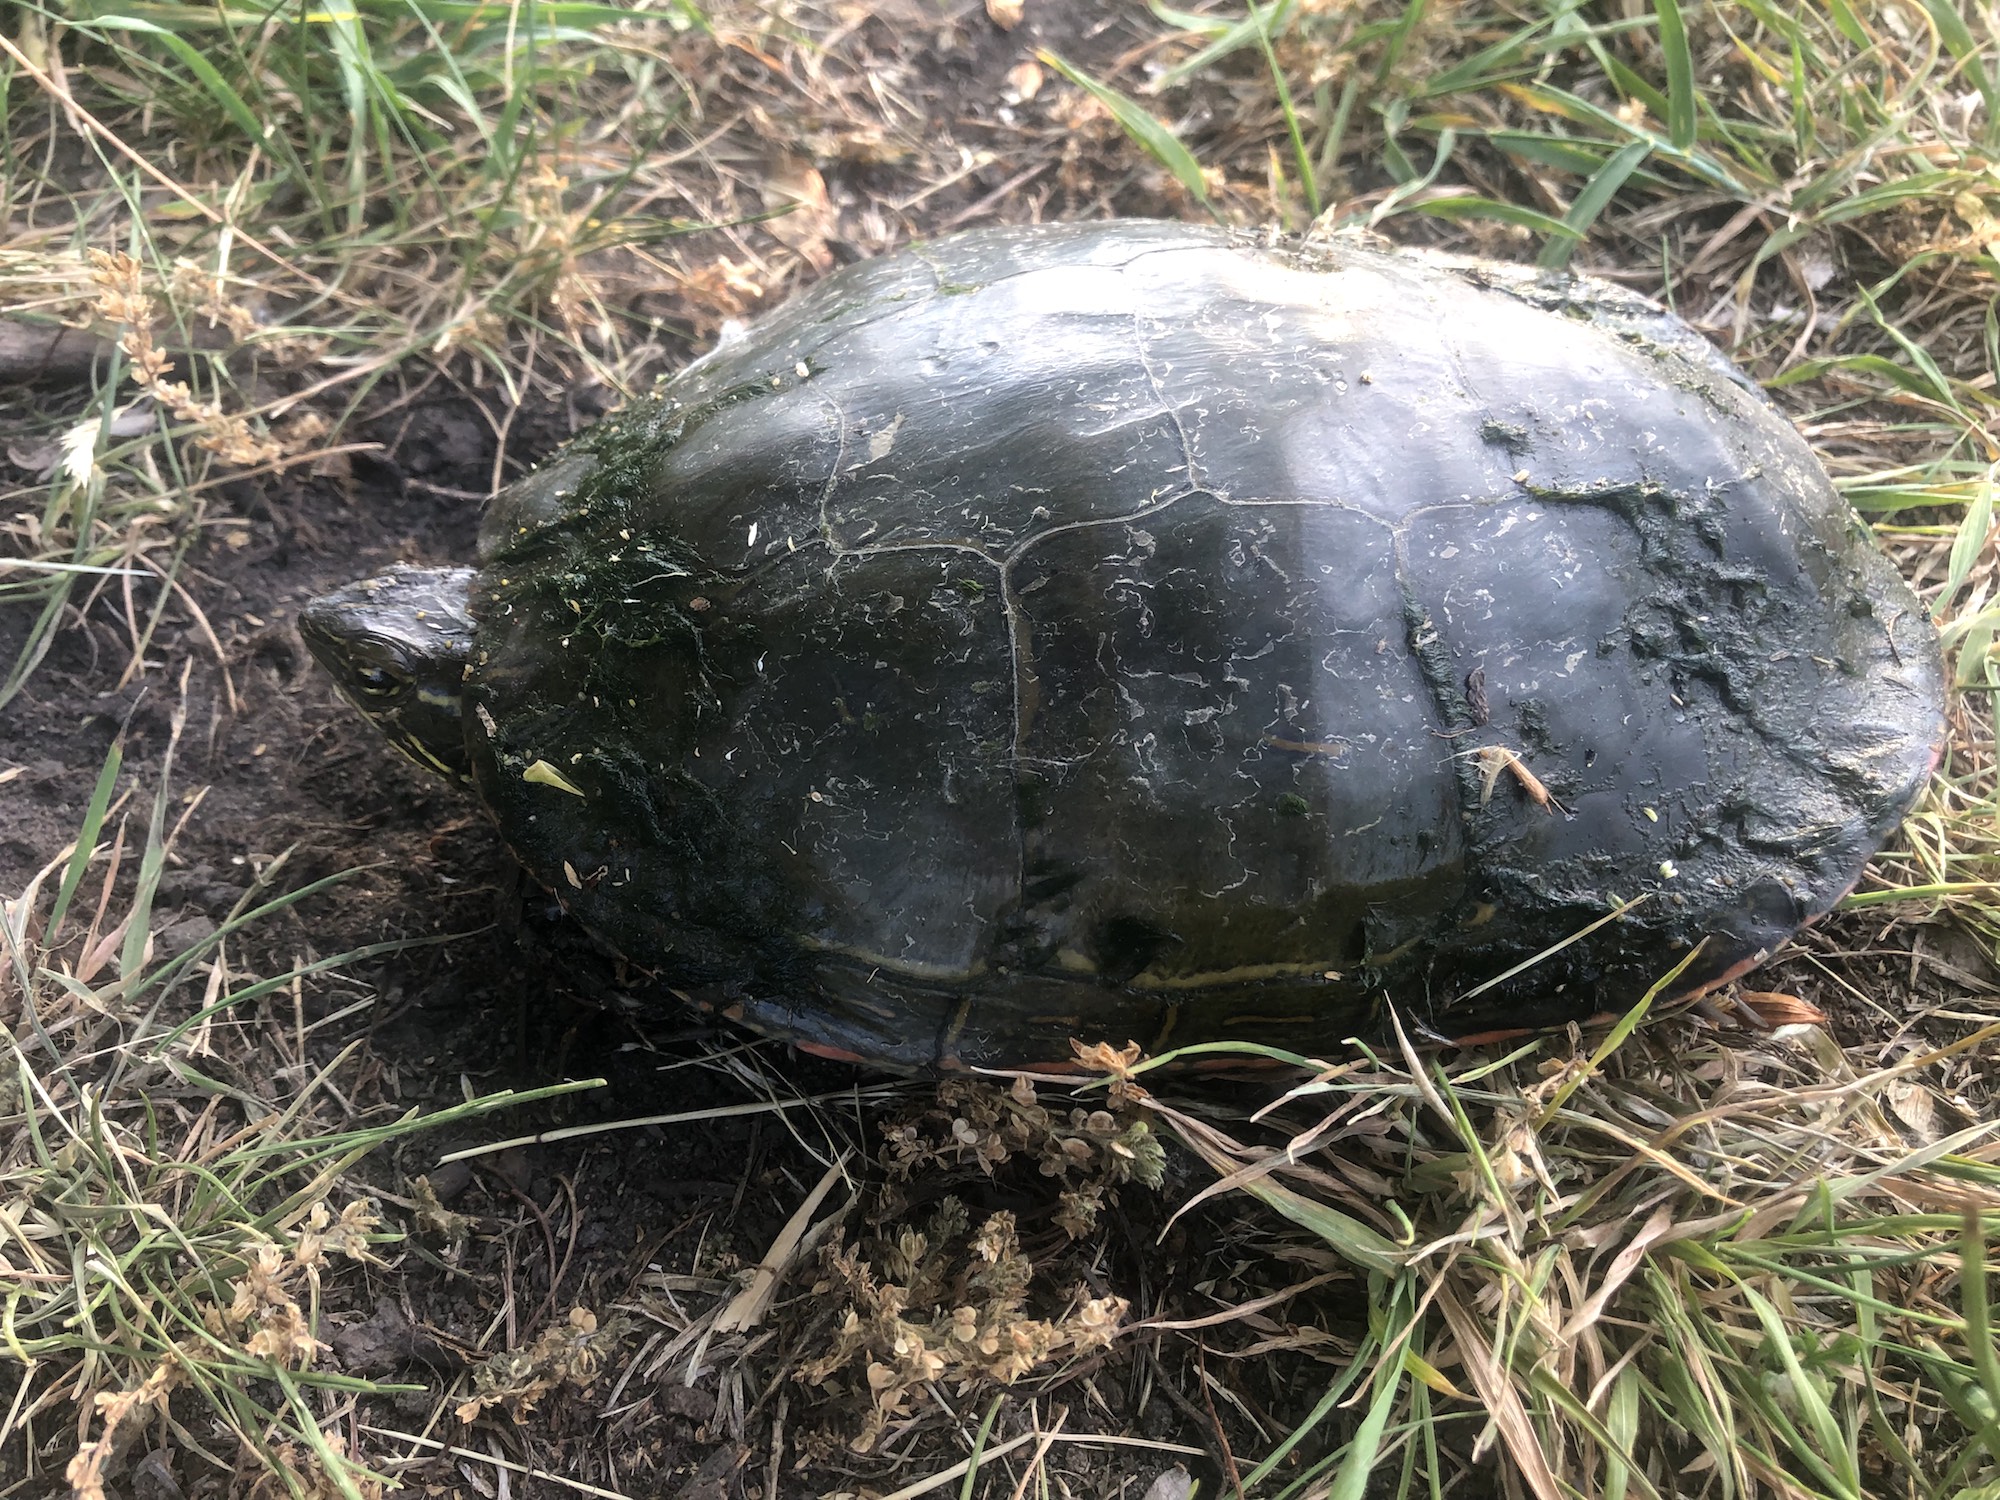 Painted Turtle laying eggs in E. Ray Stevens Aquatic Gardens in Madison, Wisconsin on June 10, 2021.